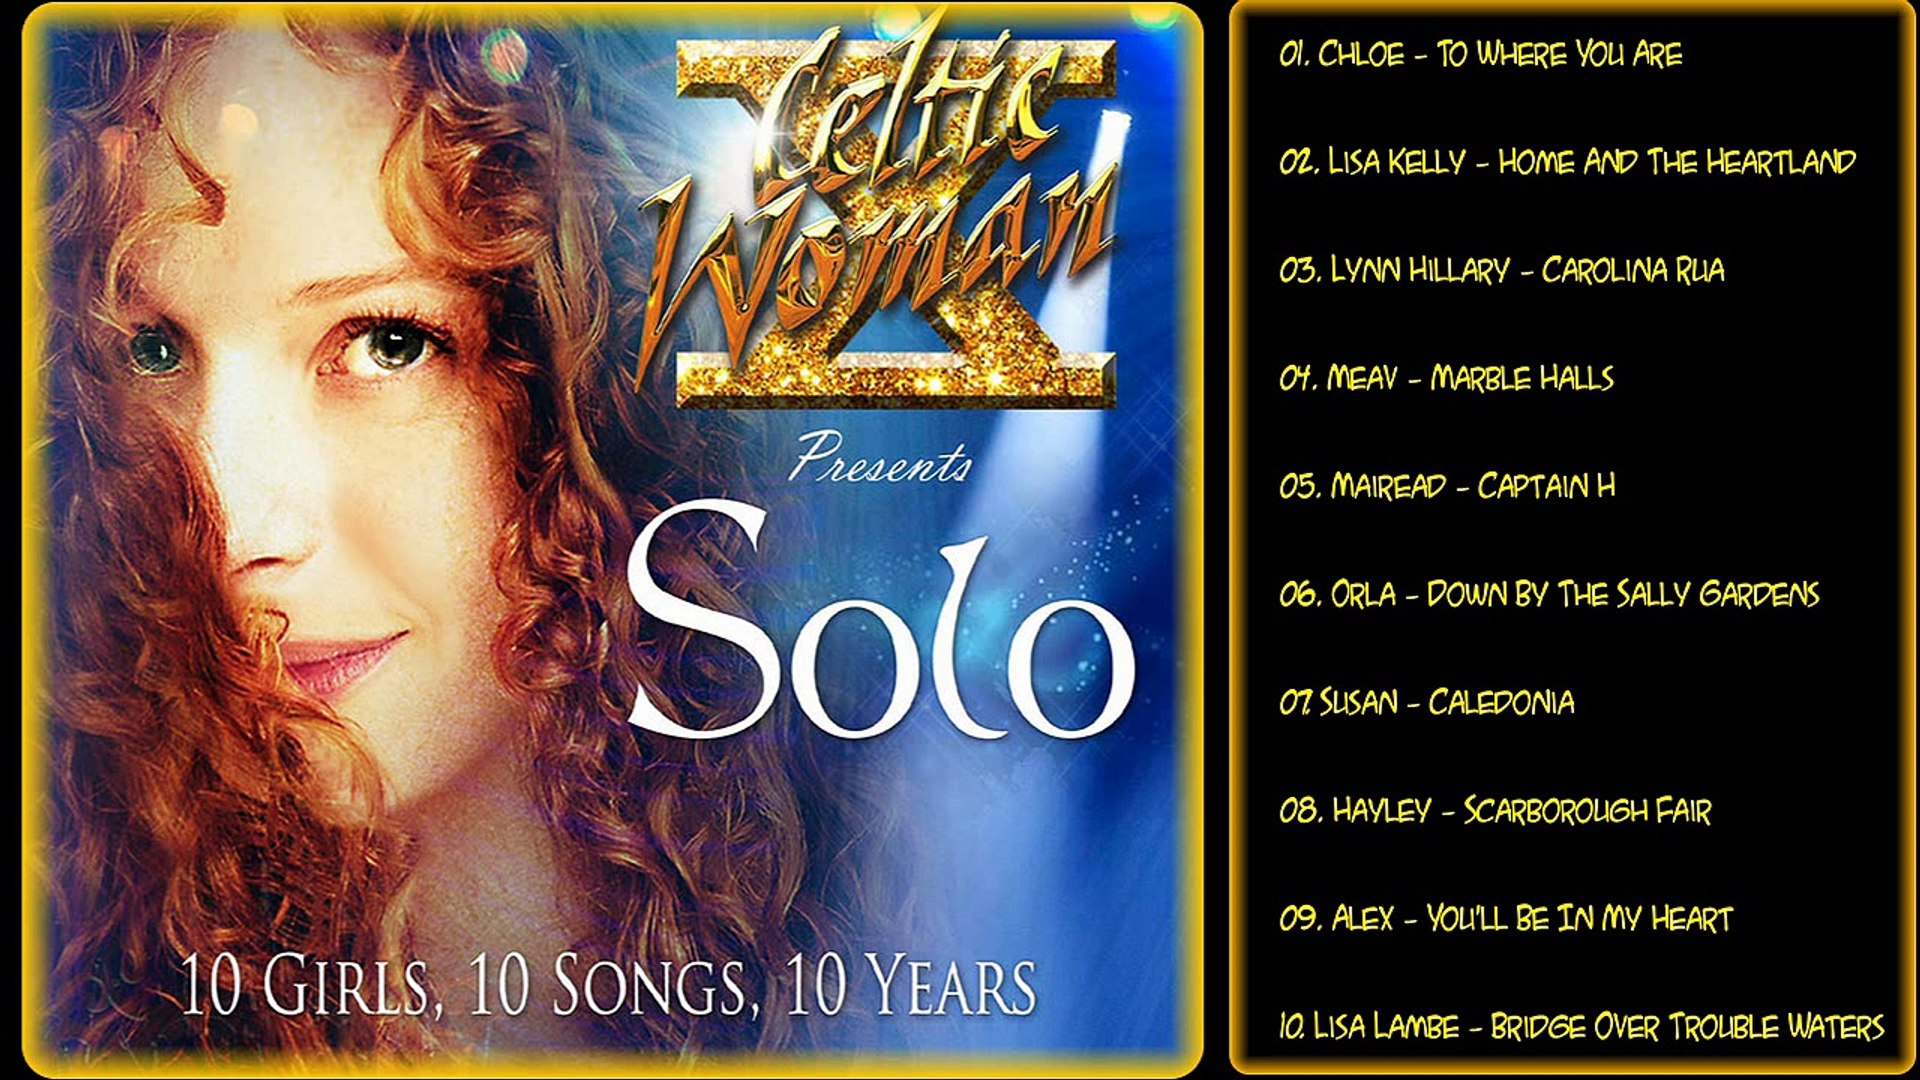 Celtic Woman Solo 10 Girls 10 Songs 10 Years 15 Full Album Video Dailymotion